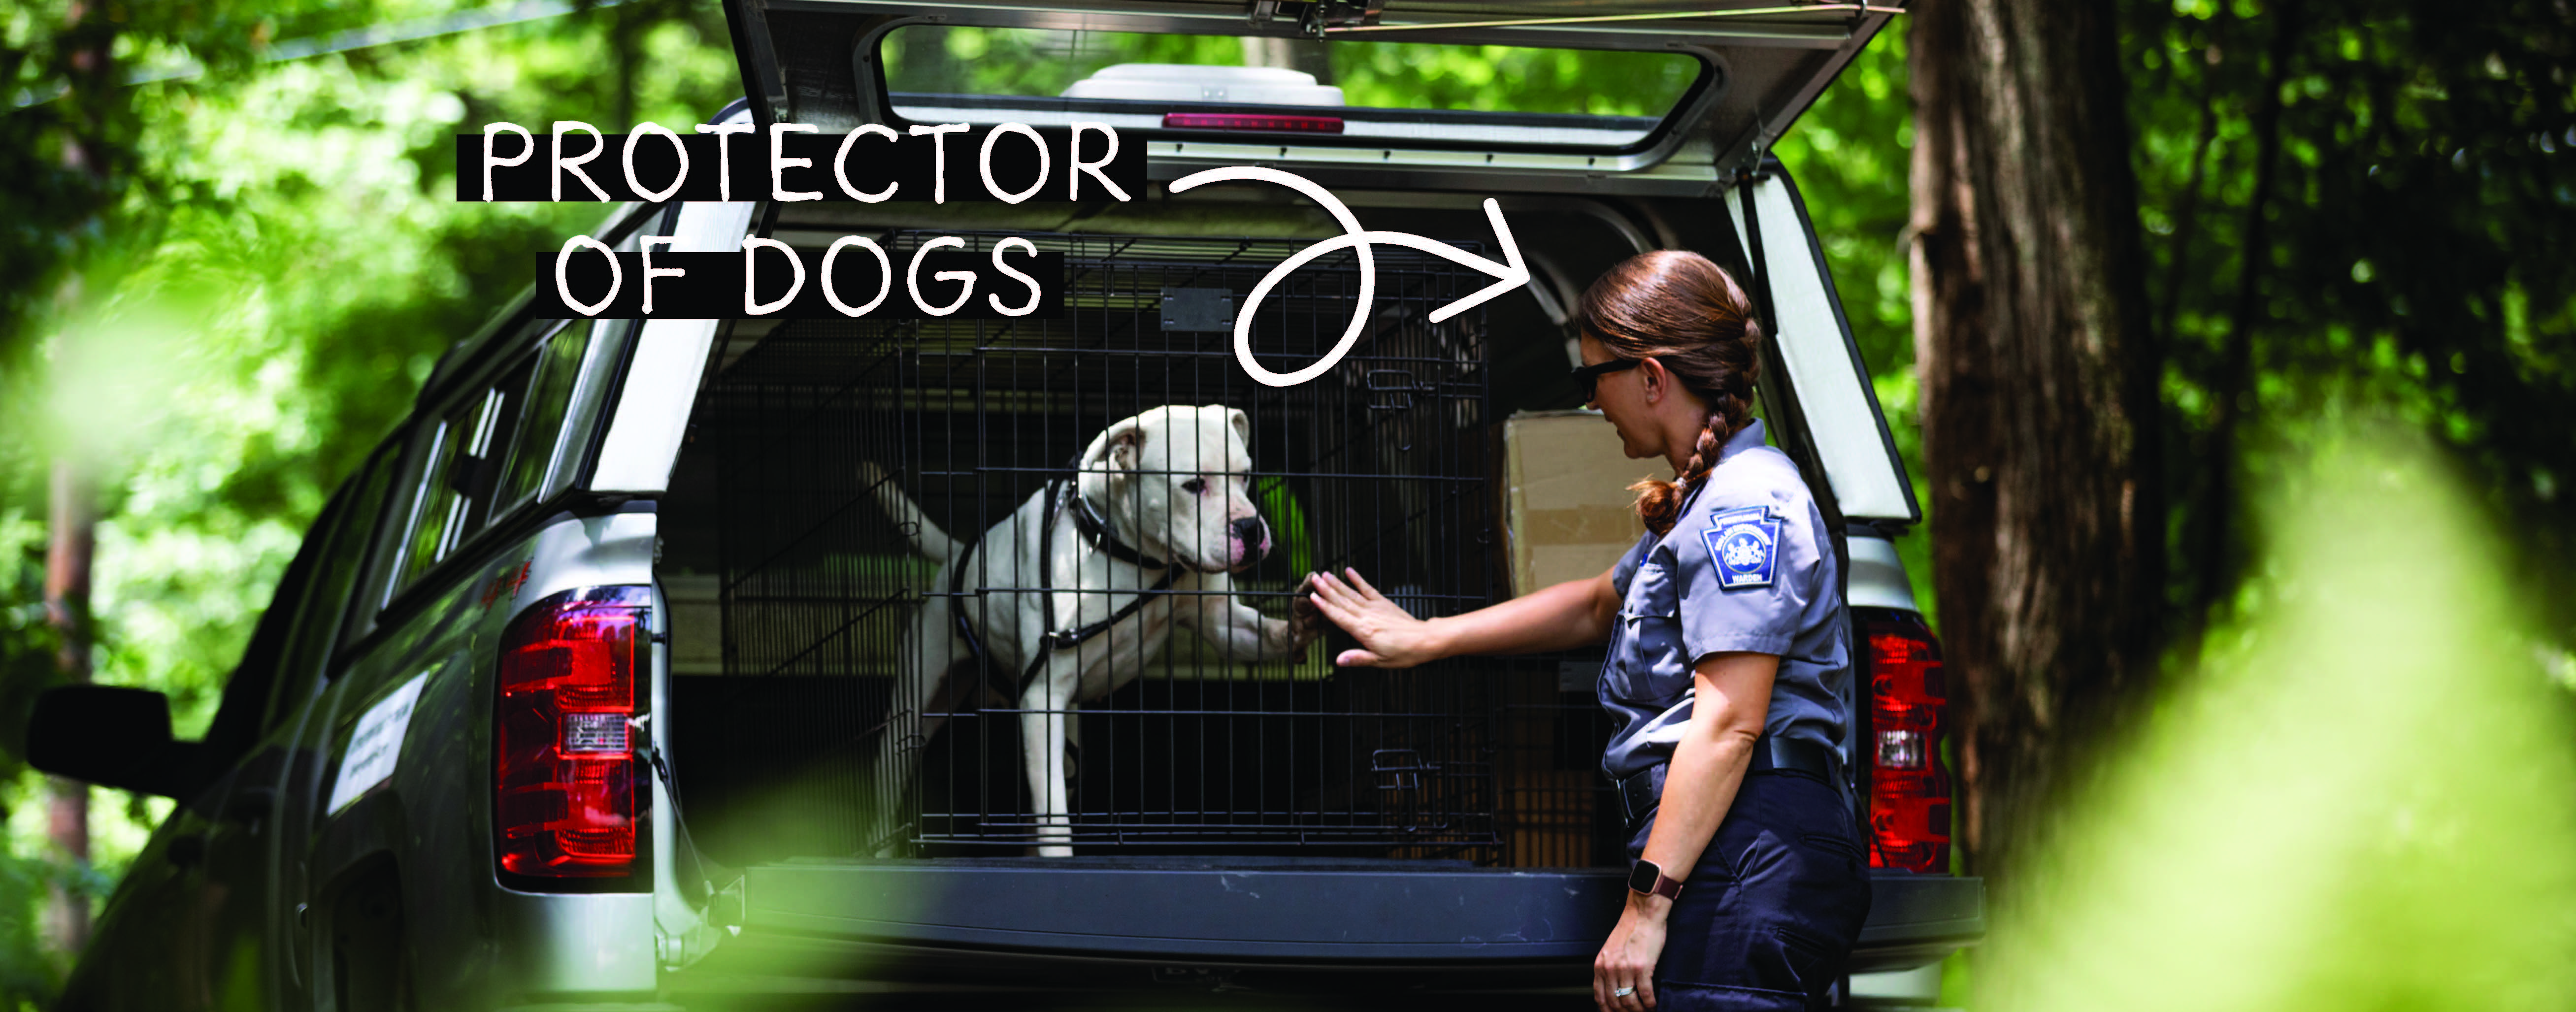 Protector of Dogs, but will it last: picture of dog warden with stray dog emphasizing need to increase dog license fee.